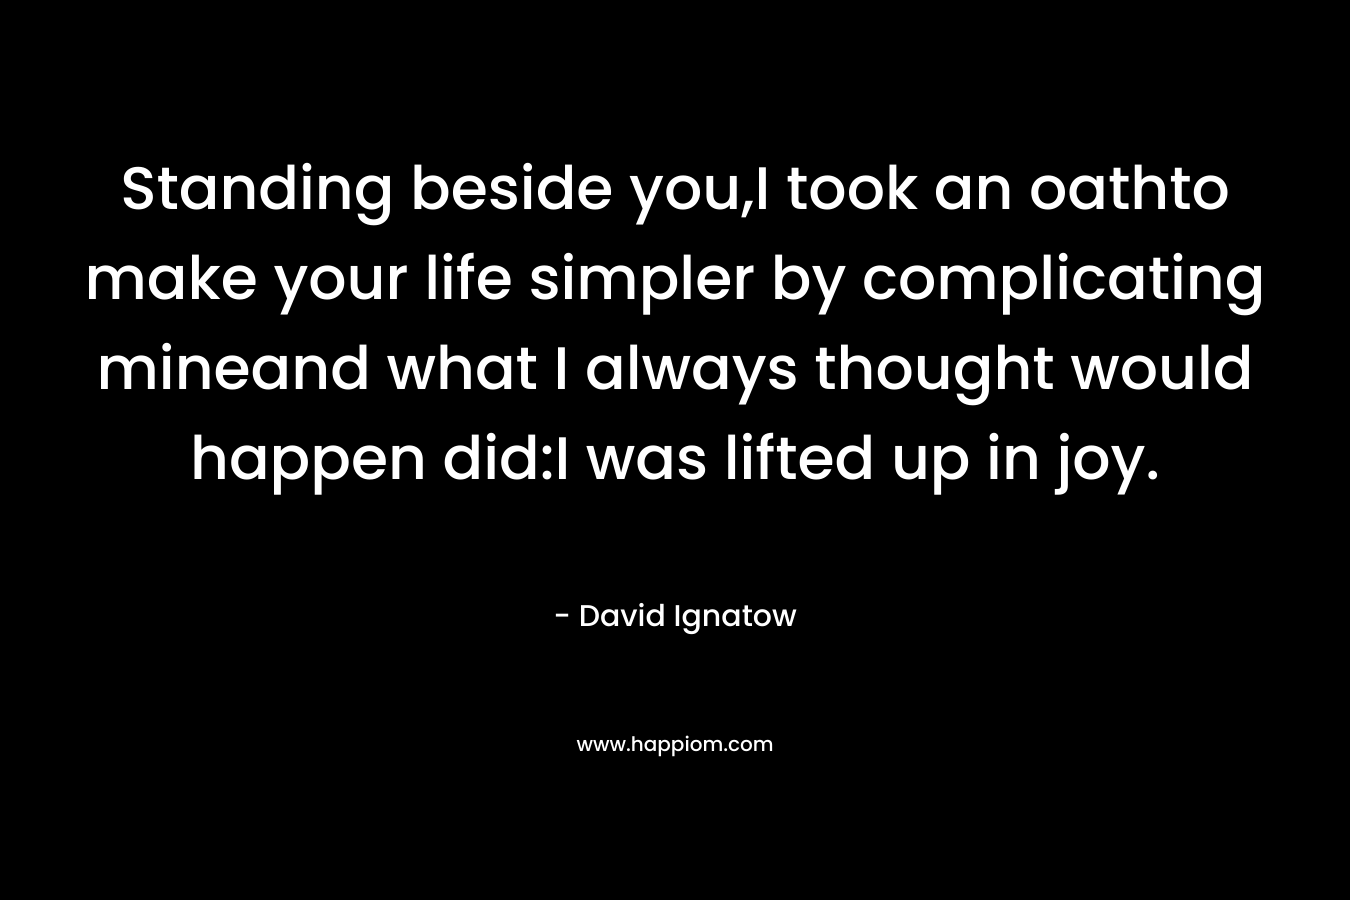 Standing beside you,I took an oathto make your life simpler by complicating mineand what I always thought would happen did:I was lifted up in joy. – David Ignatow